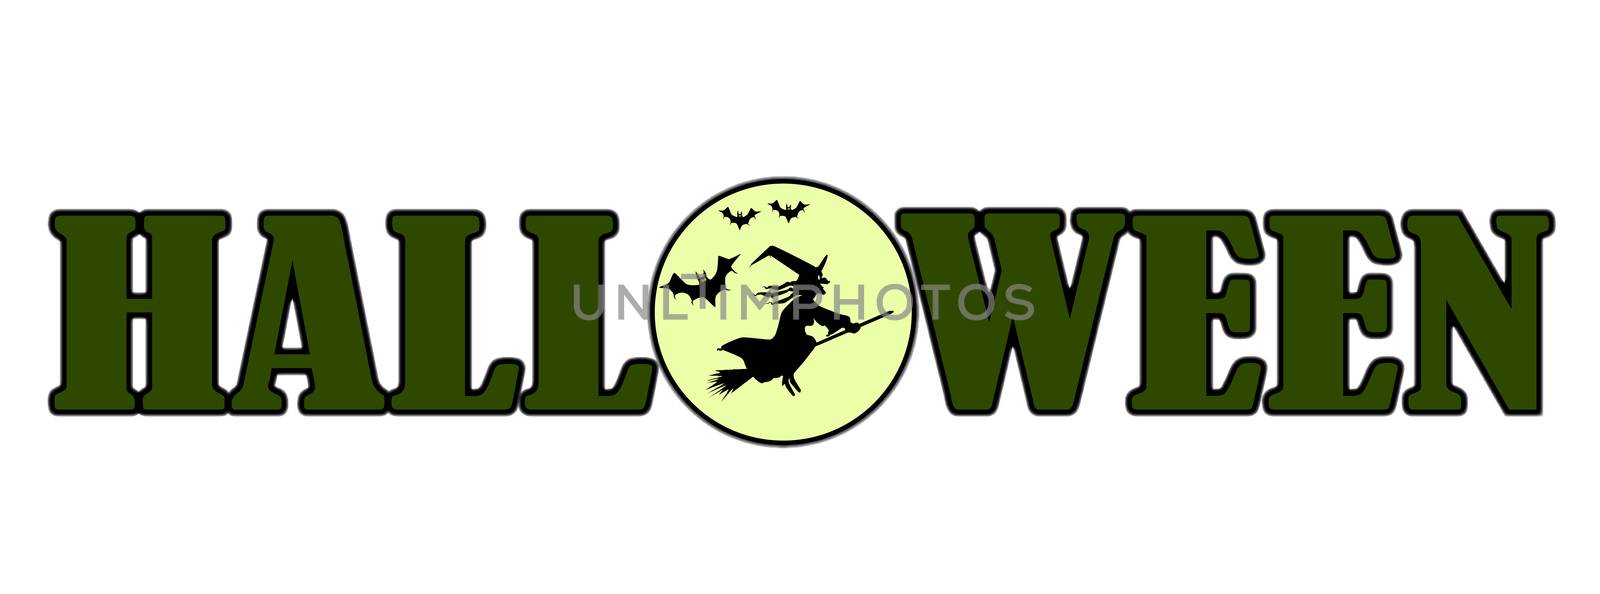 A witch and her bats flying across the full moon with the text HALLOWEEN using the moon as the middle letter